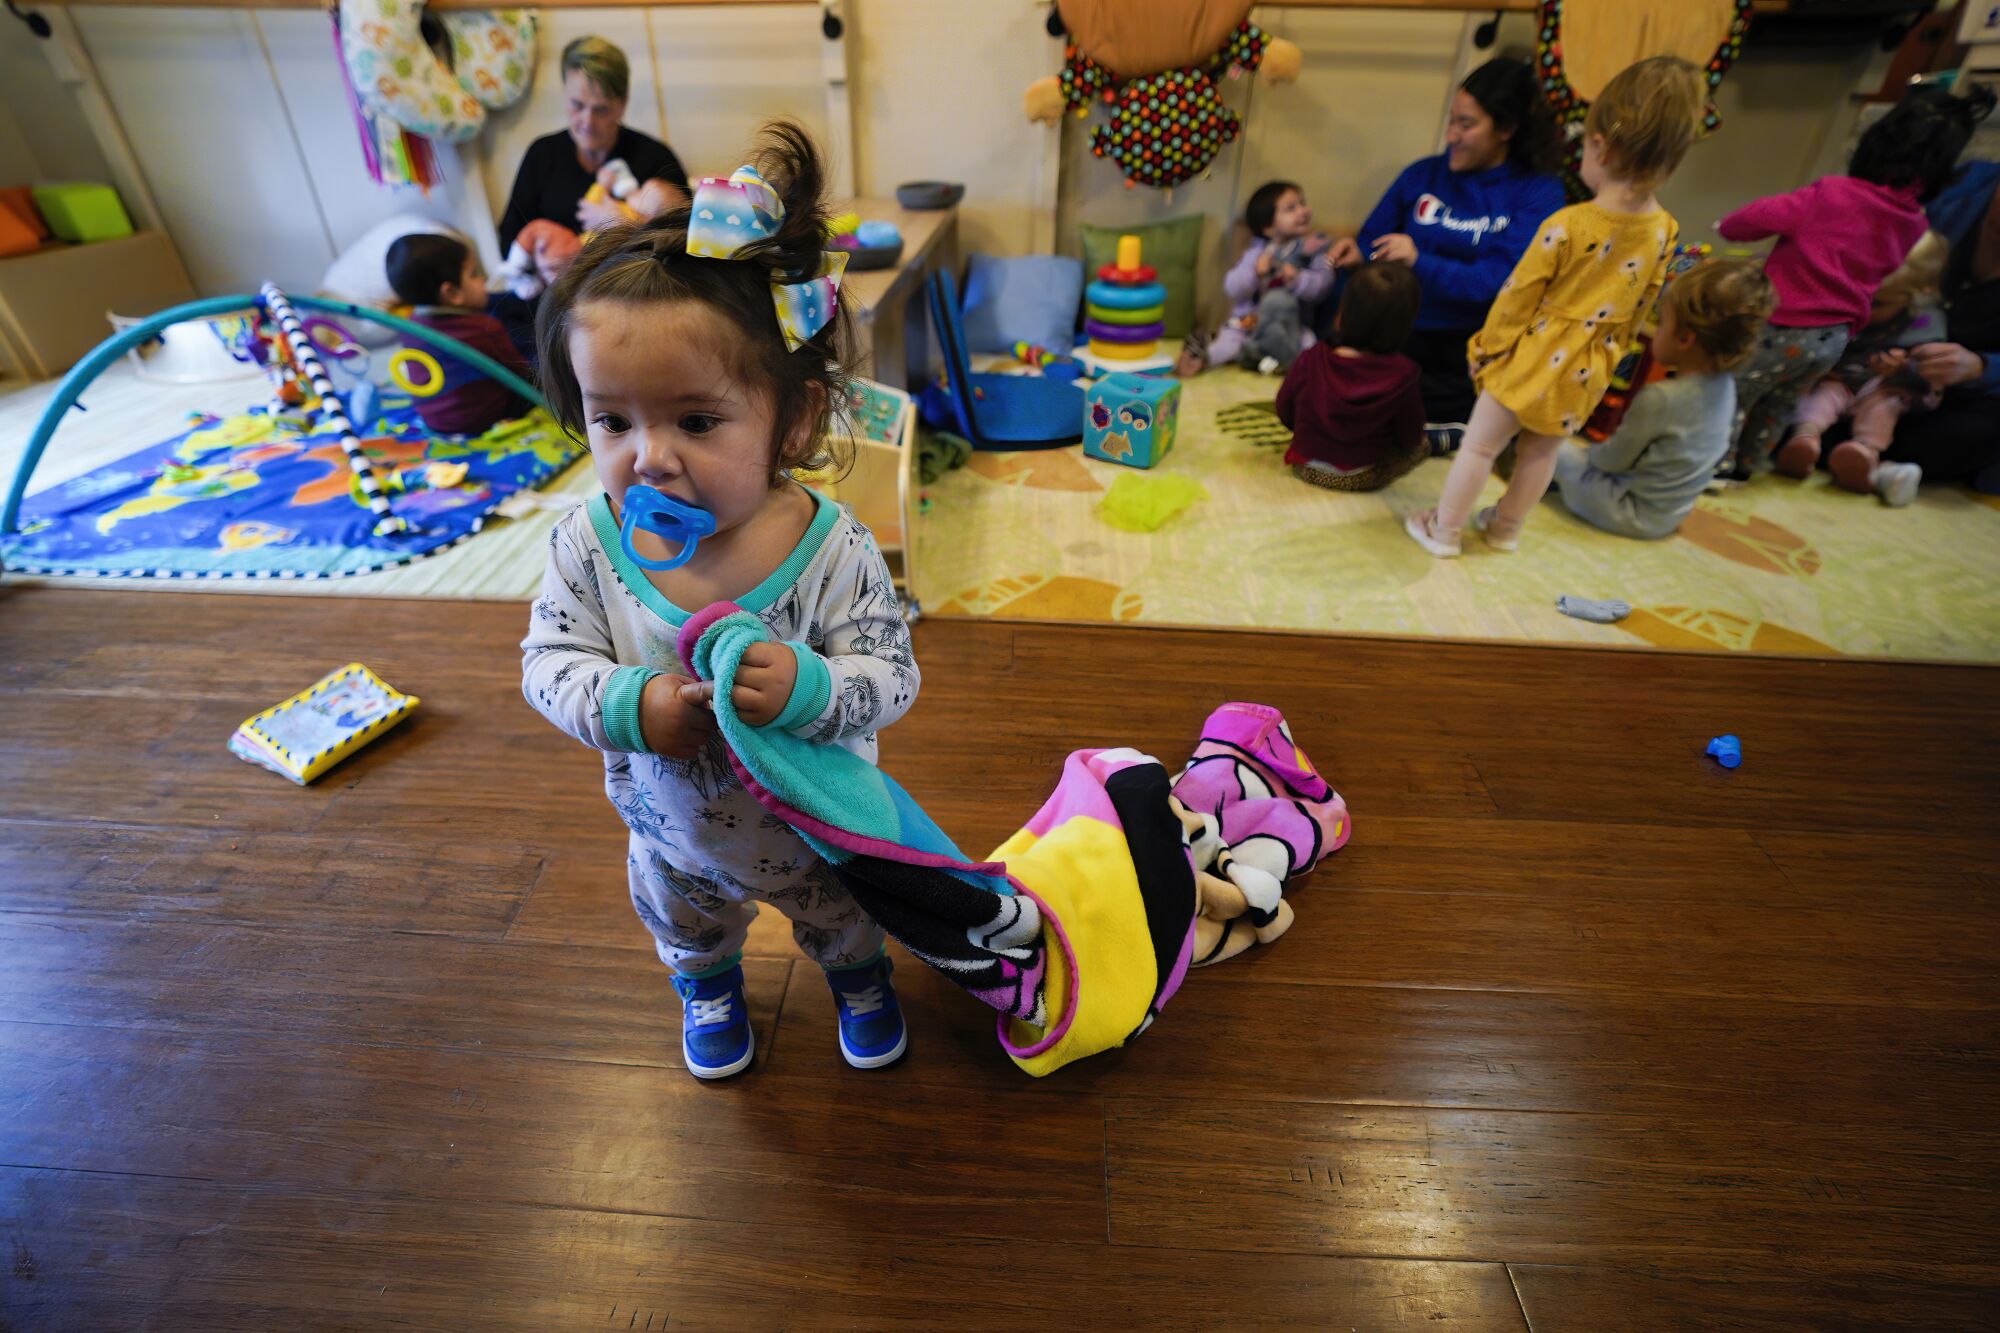 A toddler stands next to a toy, sucking a pacifier and holding a blanket, as women care for other children in the background.